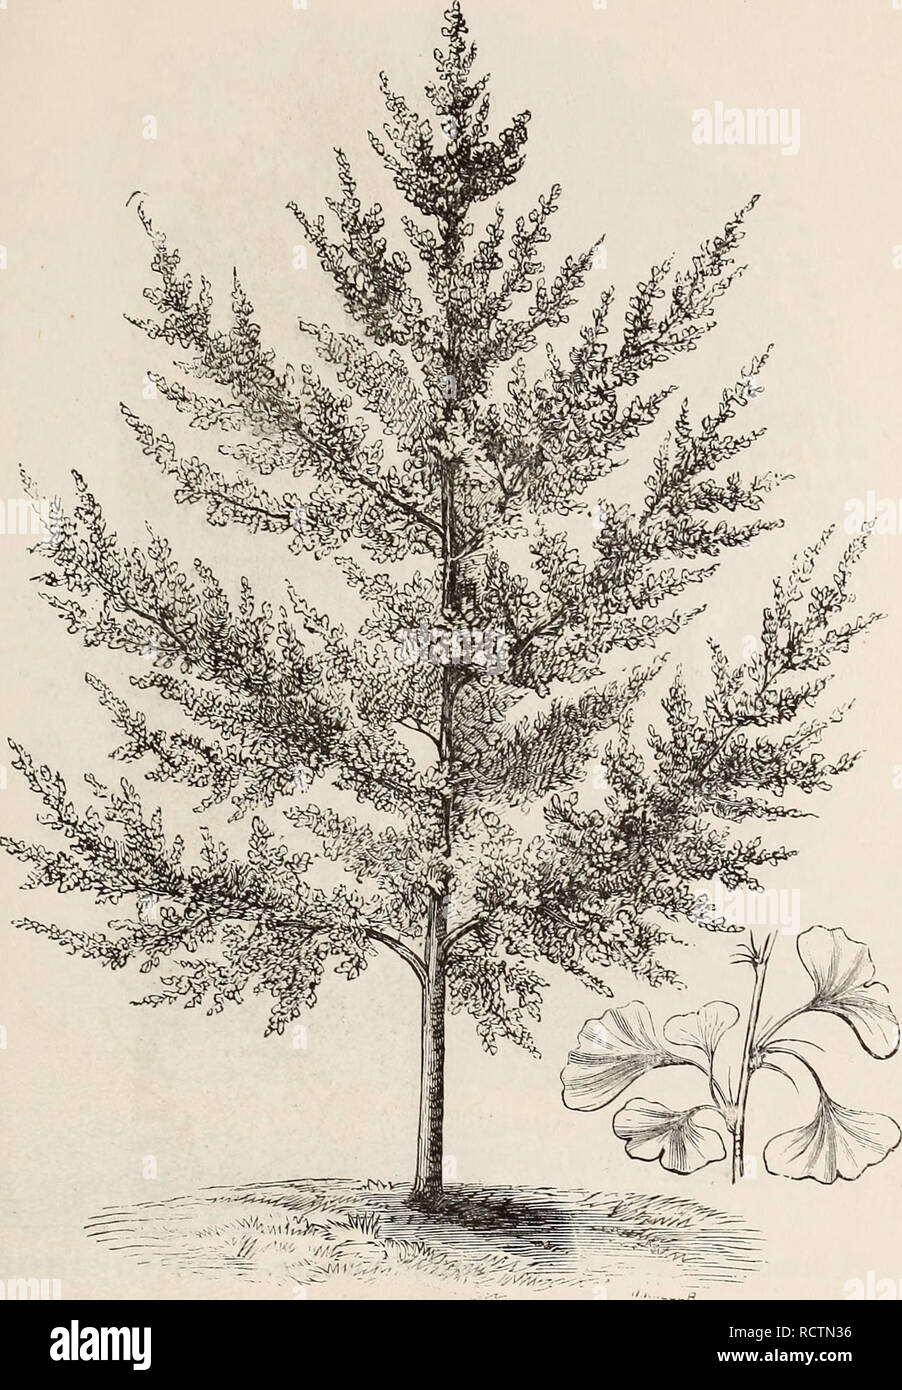 . Descriptive catalogue of ornamental trees, shrubs, roses, flowering plants, &amp;c. Ornamental trees Catalogs; Shrubs Catalogs; Roses Catalogs; Flowers Catalogs. ORNAMEJSfTAL TREES, SHRUBS, ETC. 31. SALISBURIA ADIANTIFOLIA. (Maiden Hair Tree.) Q. cerris. Turkey Oak. A evj handsome South European species, of rapid, symmetrical growth ; foHage finely lobed and deeply cut; leaves change to brown in autumn, and persist during a great part of the winter. Fine for the lawn. $1.00. Q. COCCinea. Scarlet Oak. A native tree, of rapid growth, pyramidal out- line, and especially remarkable in autumn, w Stock Photo